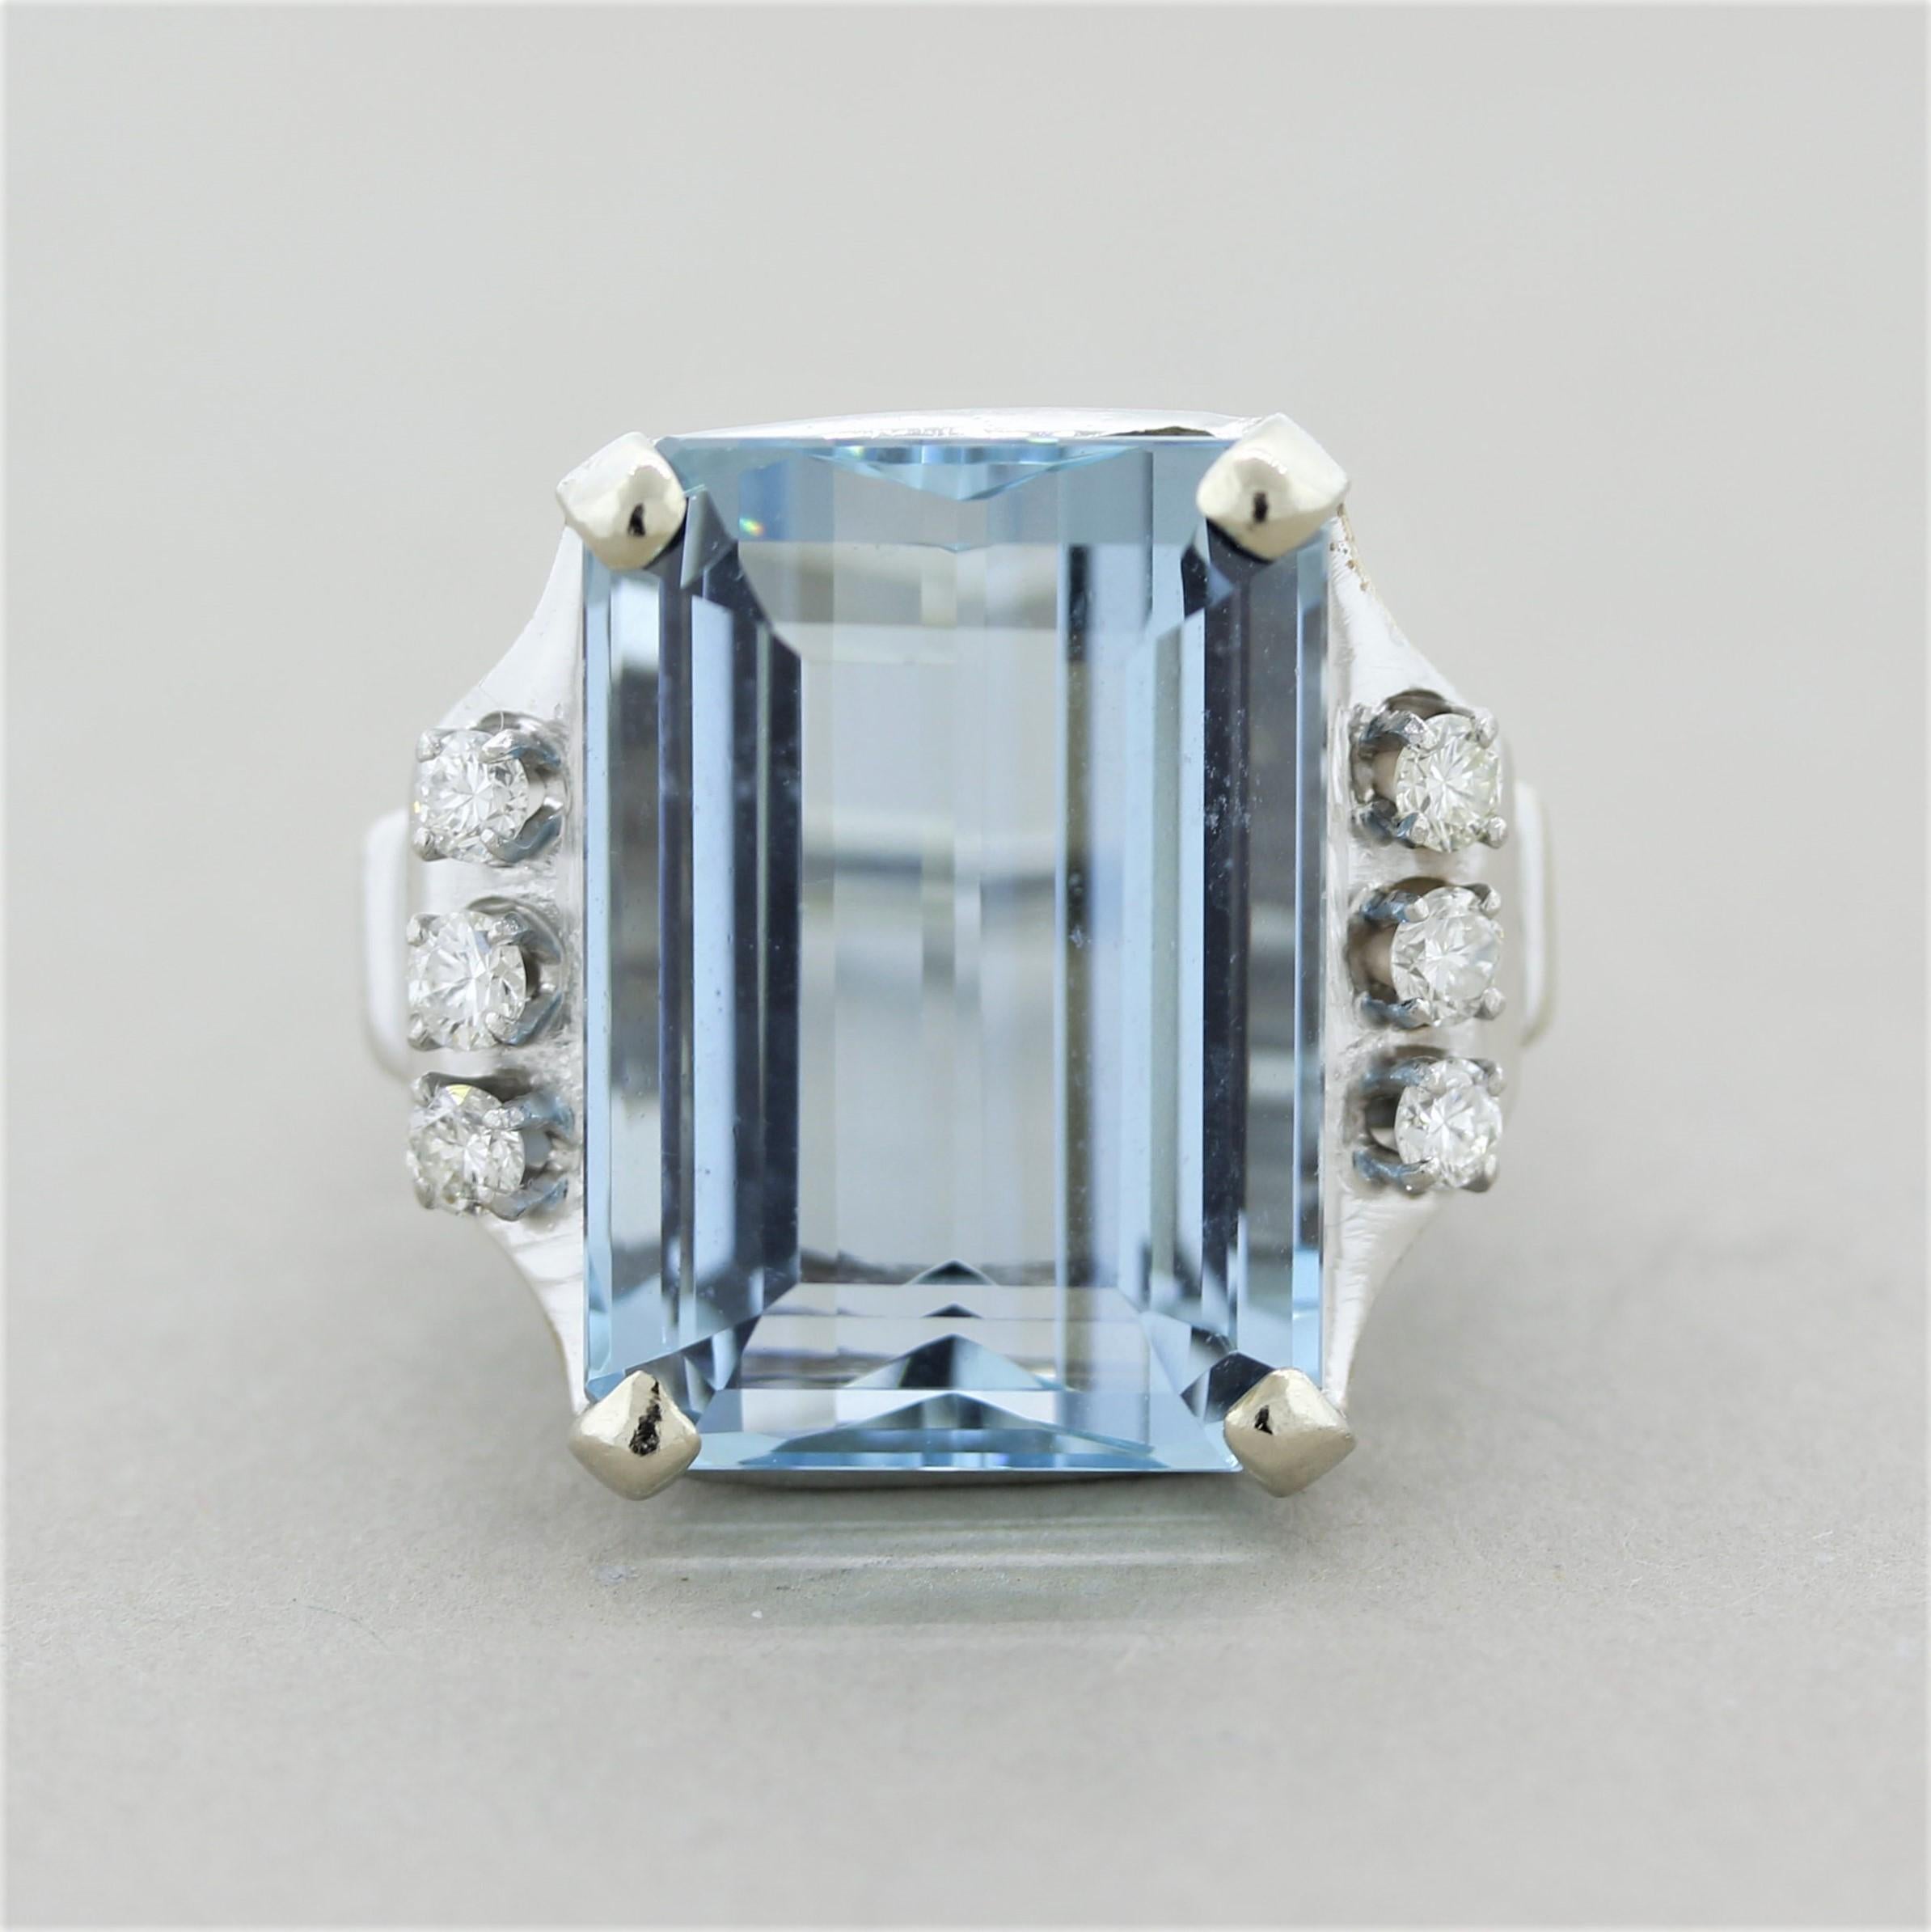 A stunning cocktail ring featuring a 19-carat rectangular aquamarine. It has a bright and pleasing sea-blue color and is free of any eye-visible inclusions which allows the stones natural color and brightness to be showcased. It is accented by 6